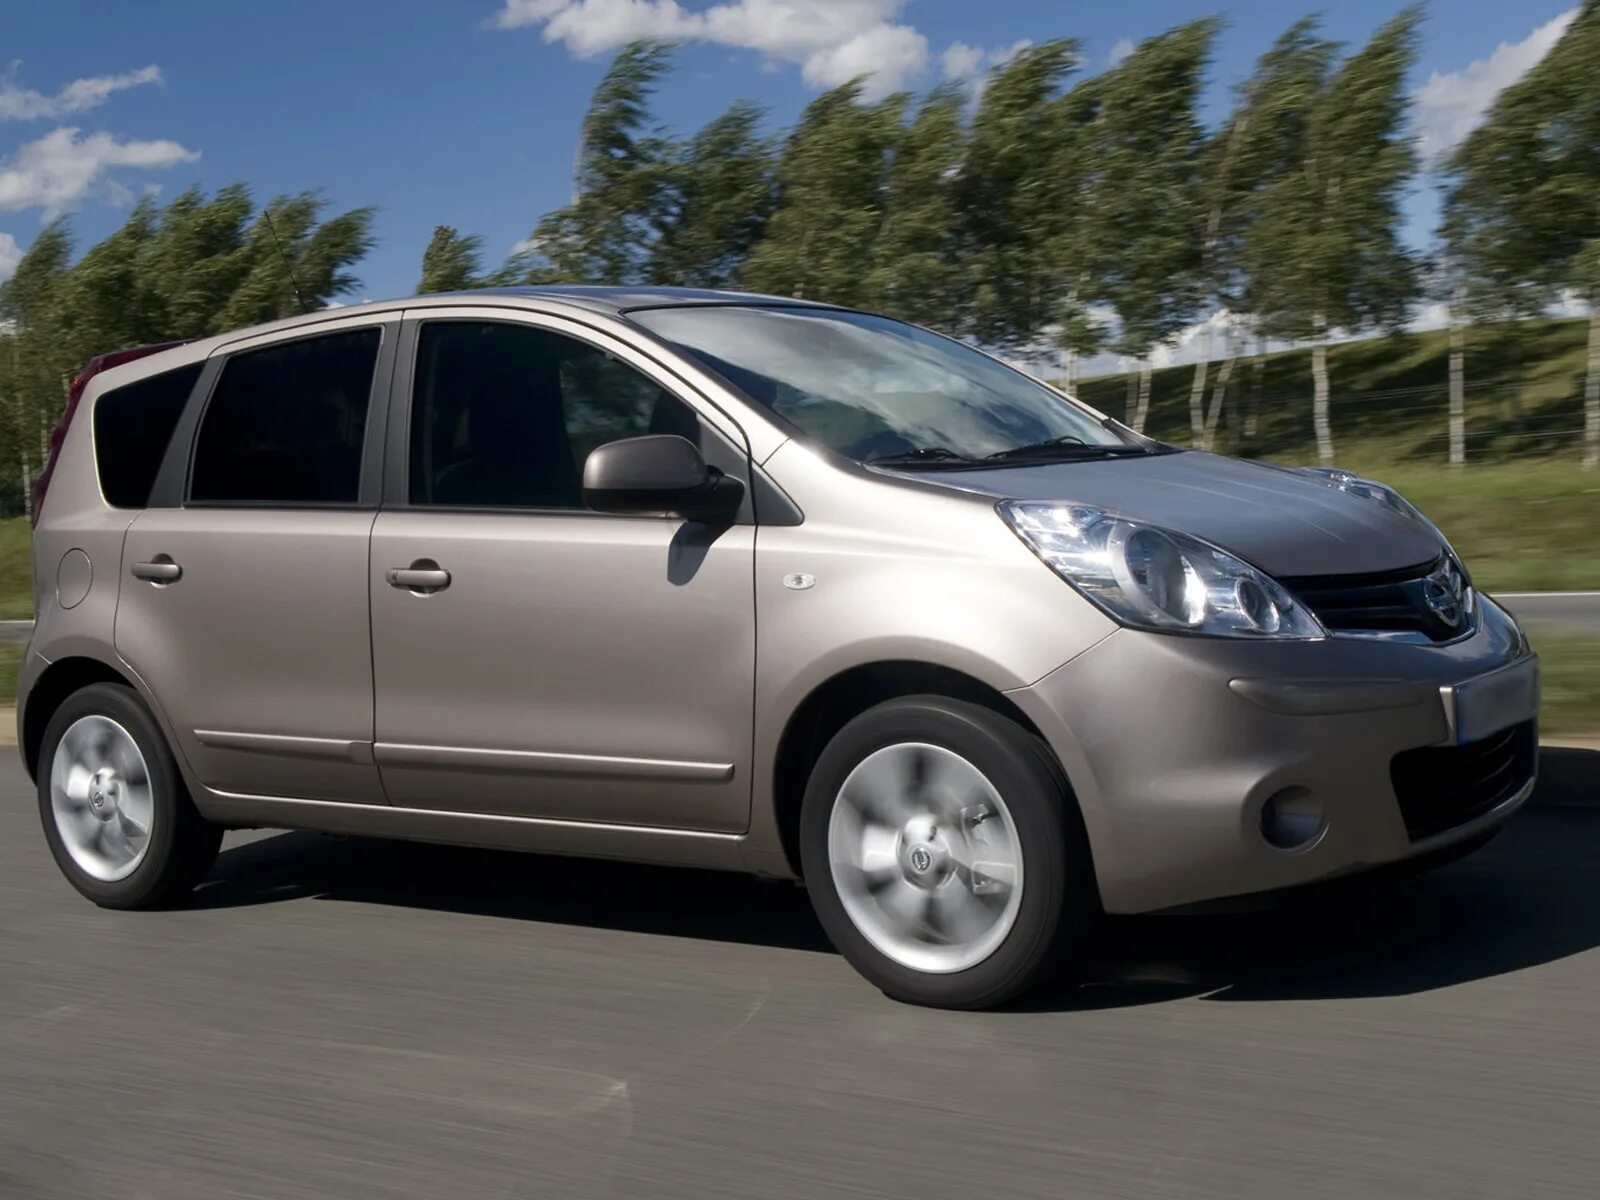 Nissan Note 2008. Nissan Note e11. Ниссан ноут 2003. Nissan Note 2014. Nissan note 11